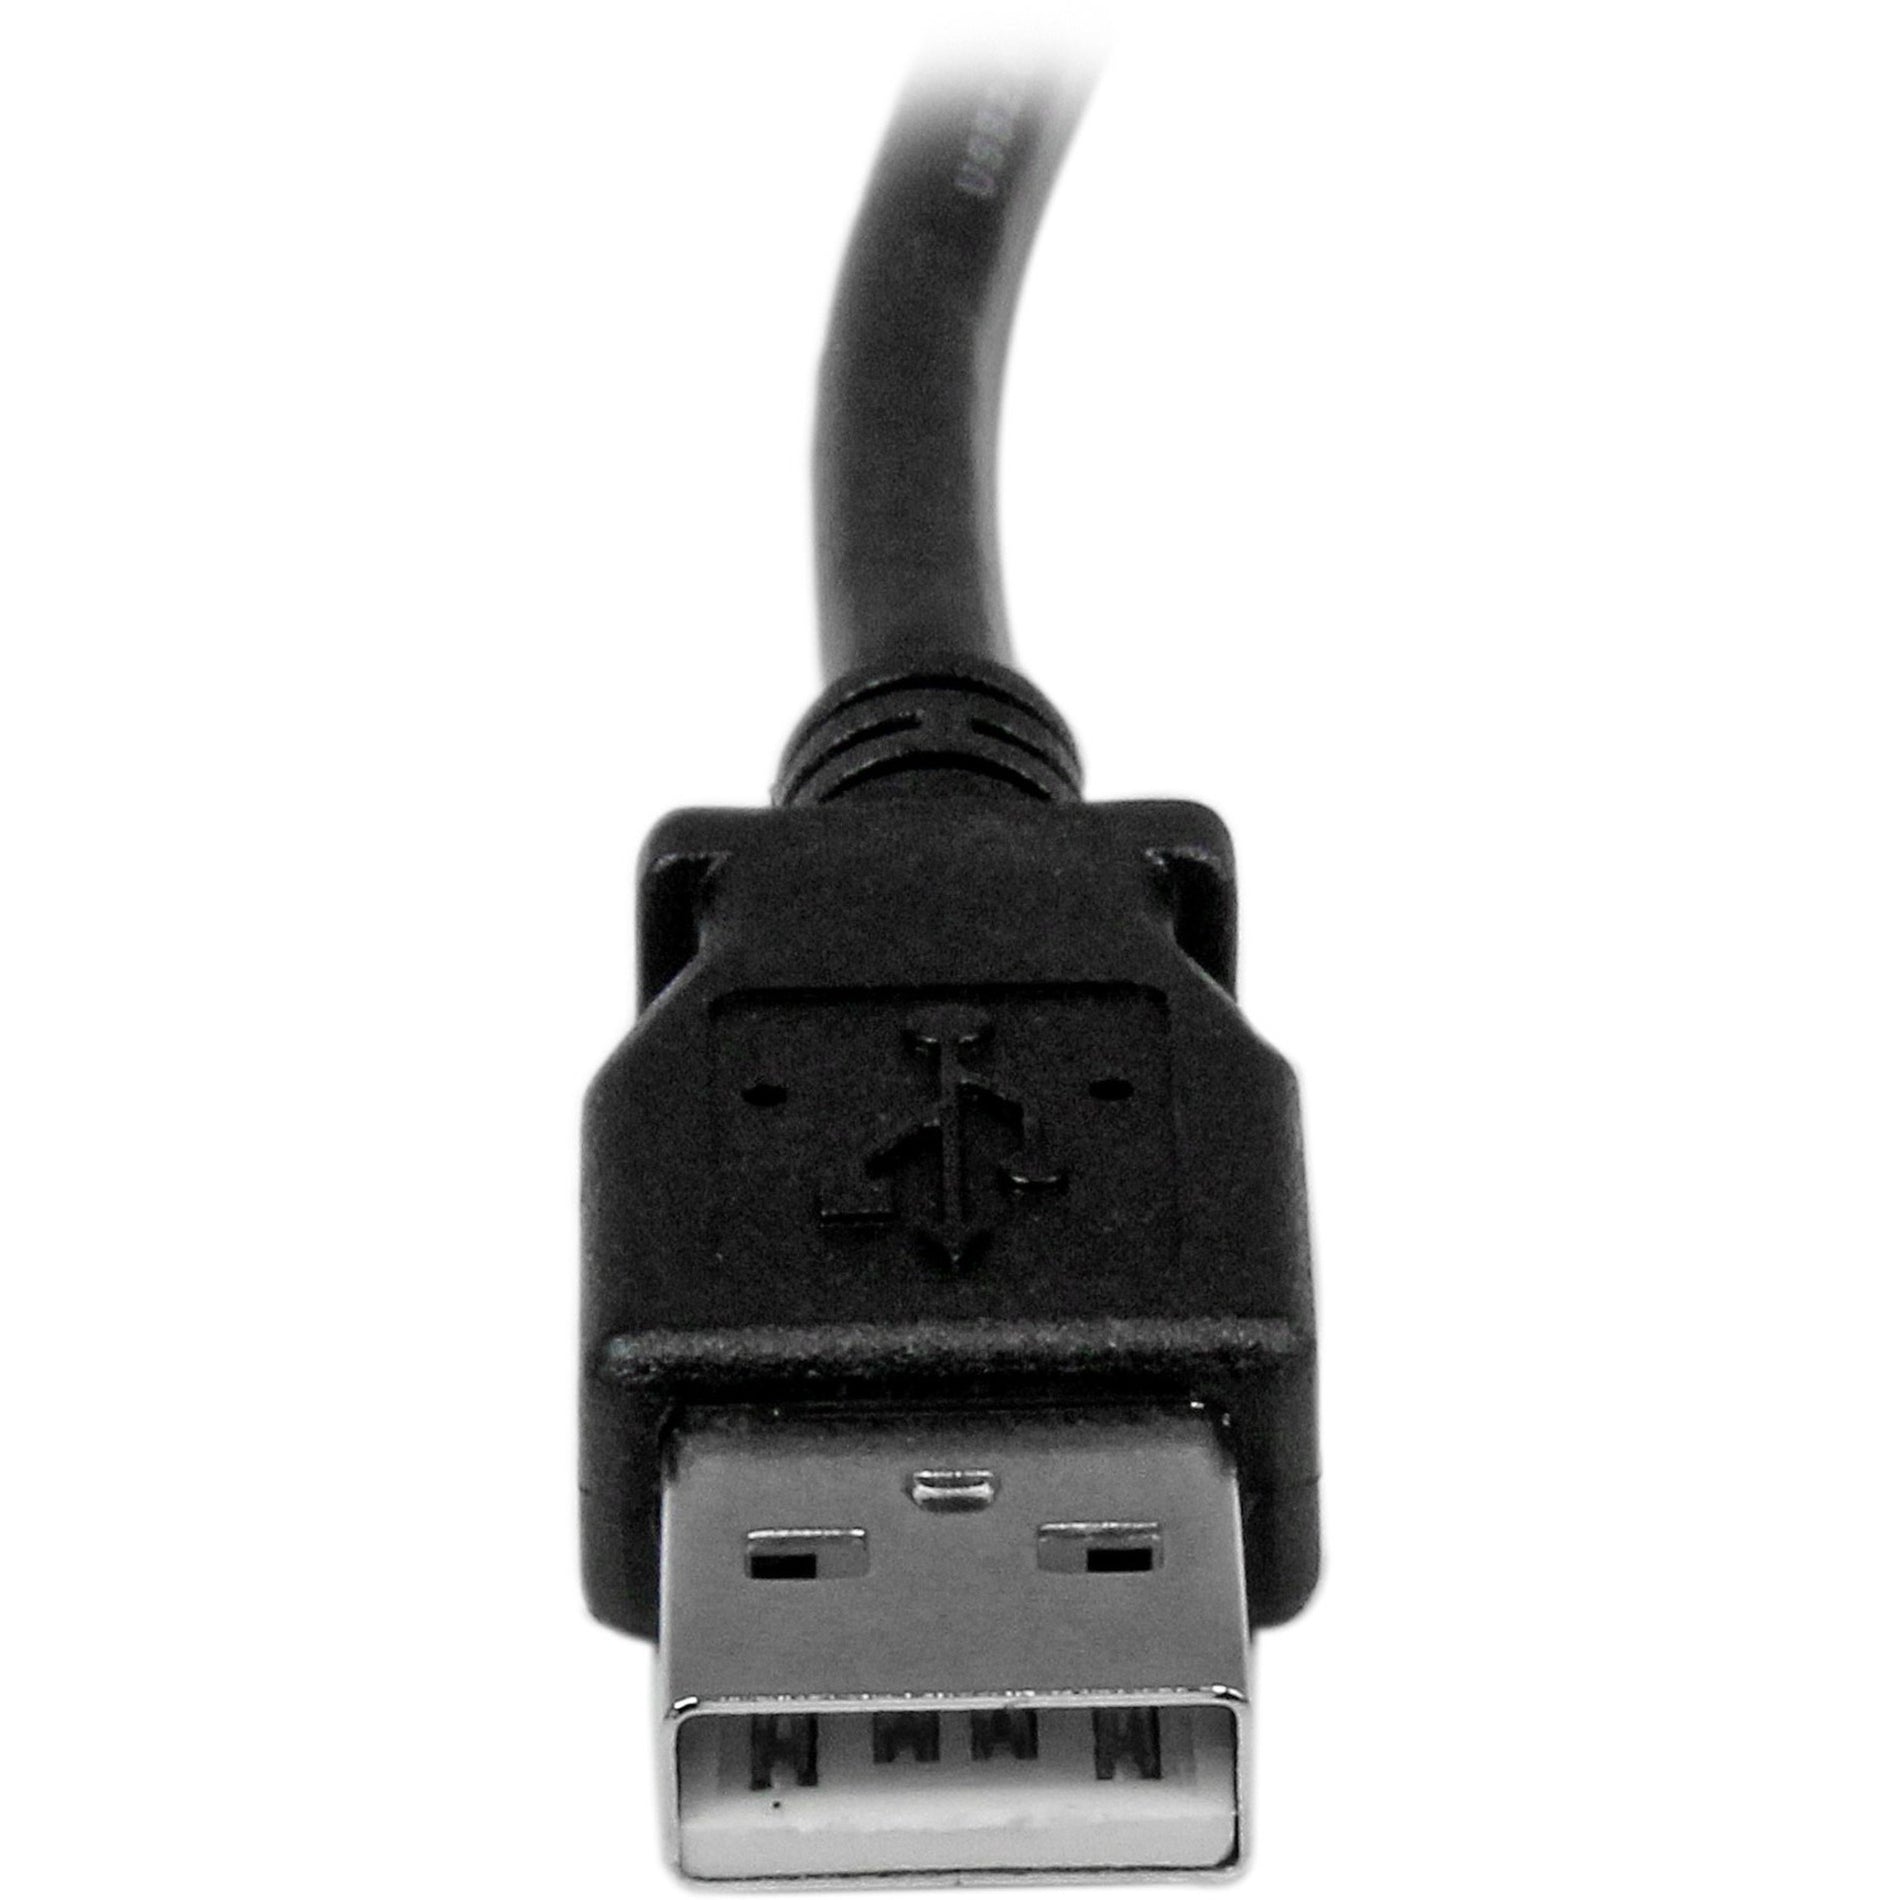 StarTech.com USBAB2ML 2m USB 2.0 A to Left Angle B Cable - M/M, 480 Mbit/s Data Transfer Rate, for Scanner, Printer, Hard Drive